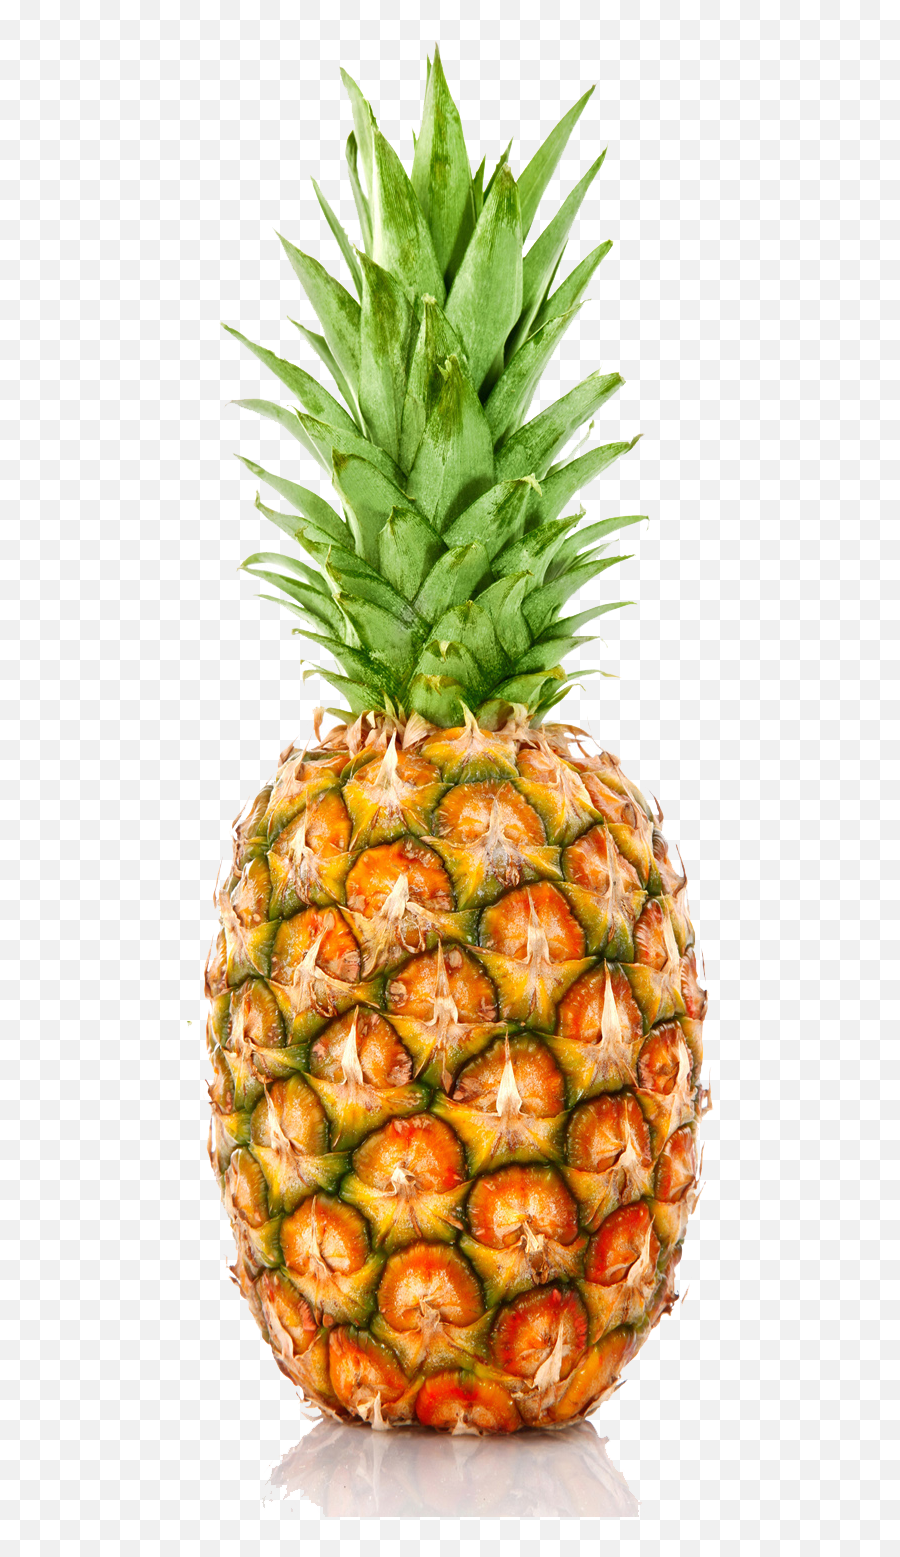 Pineapple Clipart Juicy Pineapple - Pineapple With Transparent Background Emoji,Pineapple Emoji Png